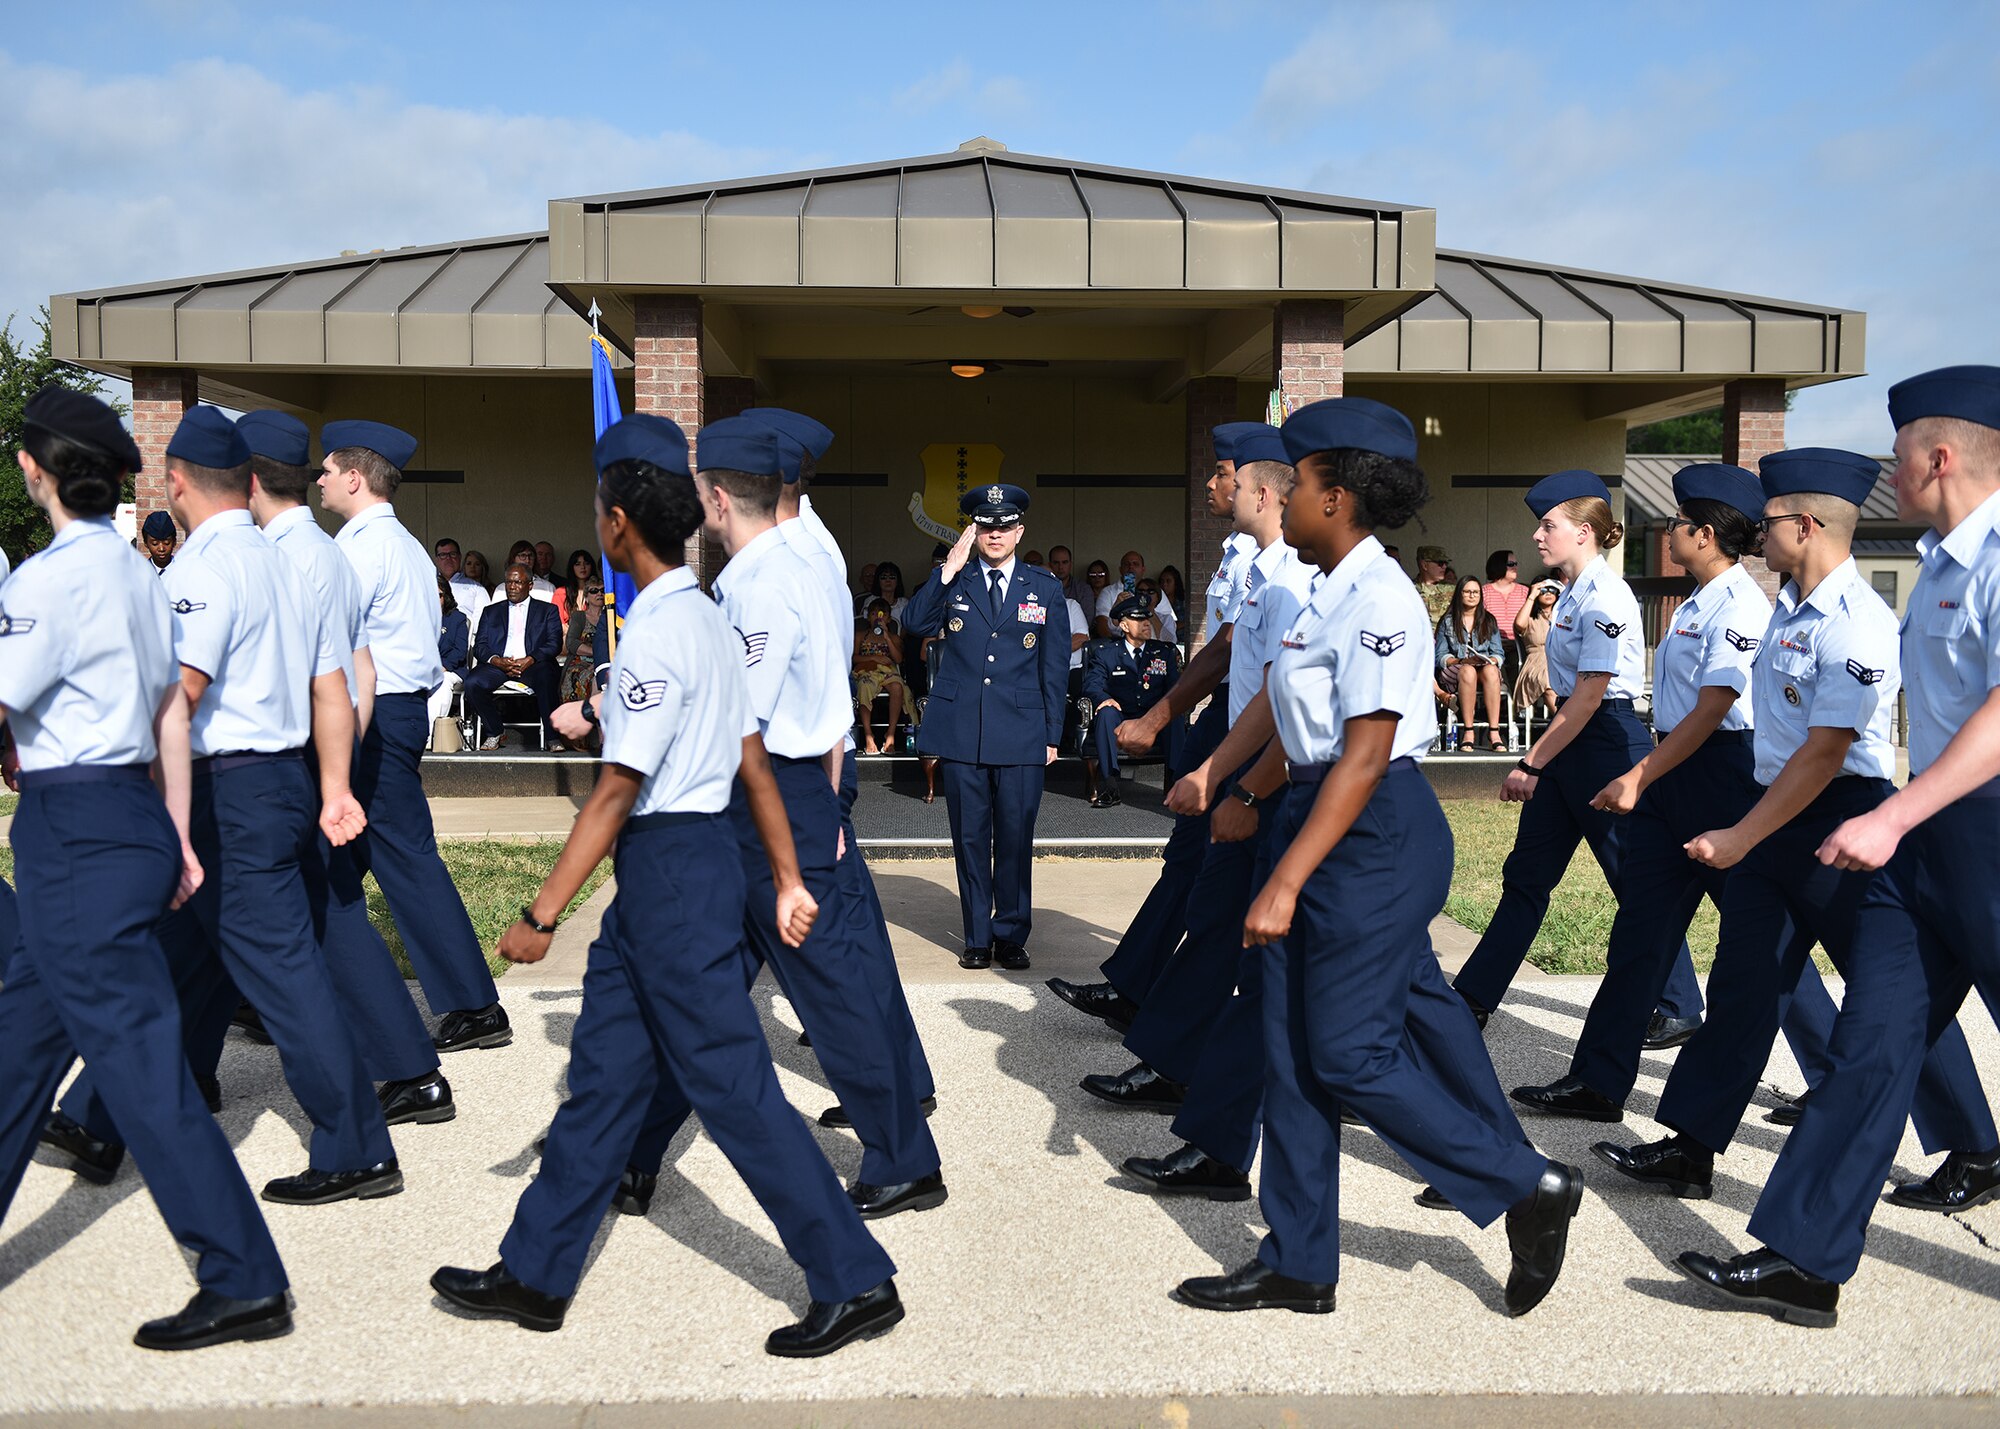 U.S. Air Force Col. Andres Nazario, 17th Training Wing commander, salutes the formation during the pass in review portion of the 17th TRW change of command ceremony at the parade field on Goodfellow Air Force Base, Texas, June 28, 2019. The pass in review is a military tradition meant as a way for a new commander to inspect the troops. (U.S. Air Force photo by Staff Sgt. Chad Warren/Released)